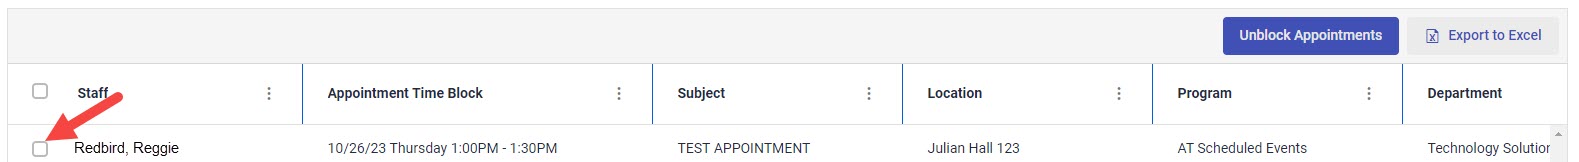 Checkbox next to blocked appointment to unblock